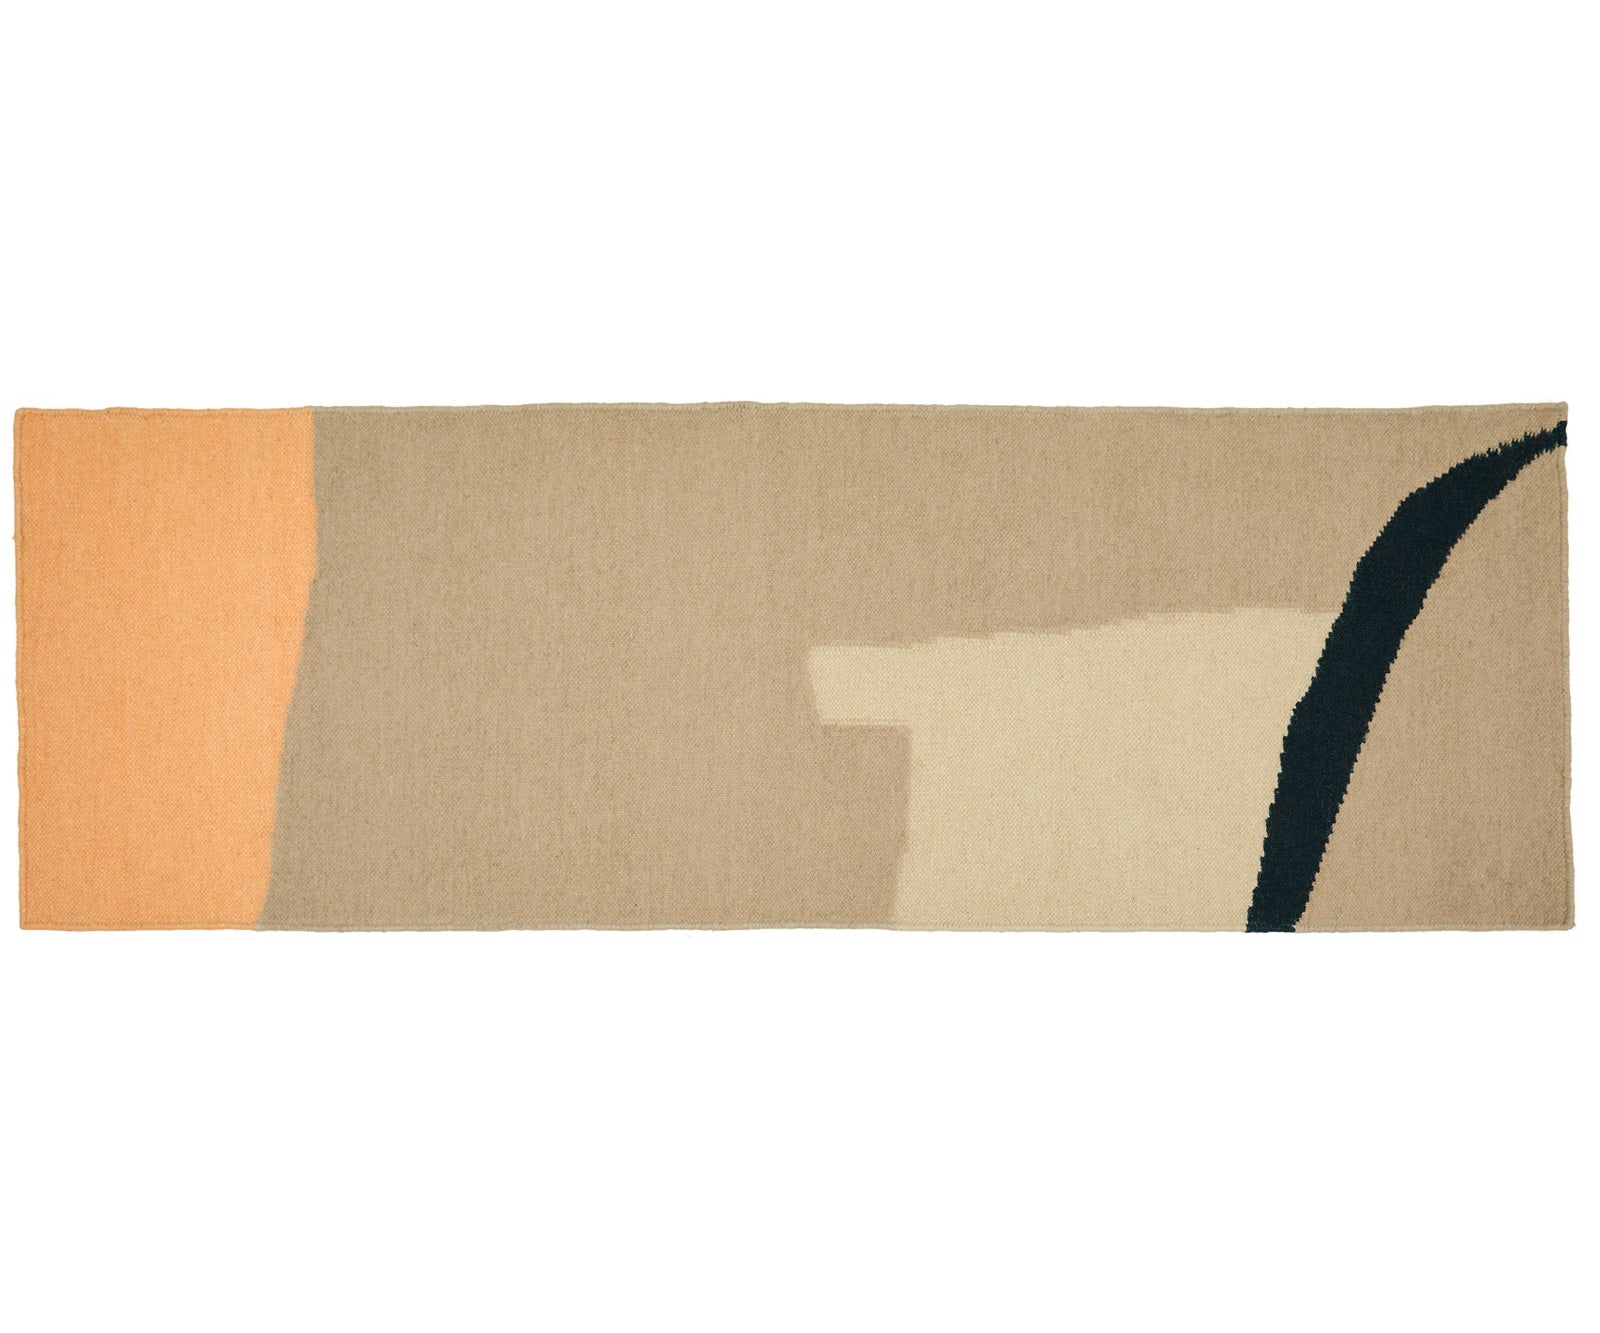 A flatweave runner from Cold Picnic. An abstract design featuring tan with salmon, cream and black. Well suited to high traffic areas. Available in size 2x6'.